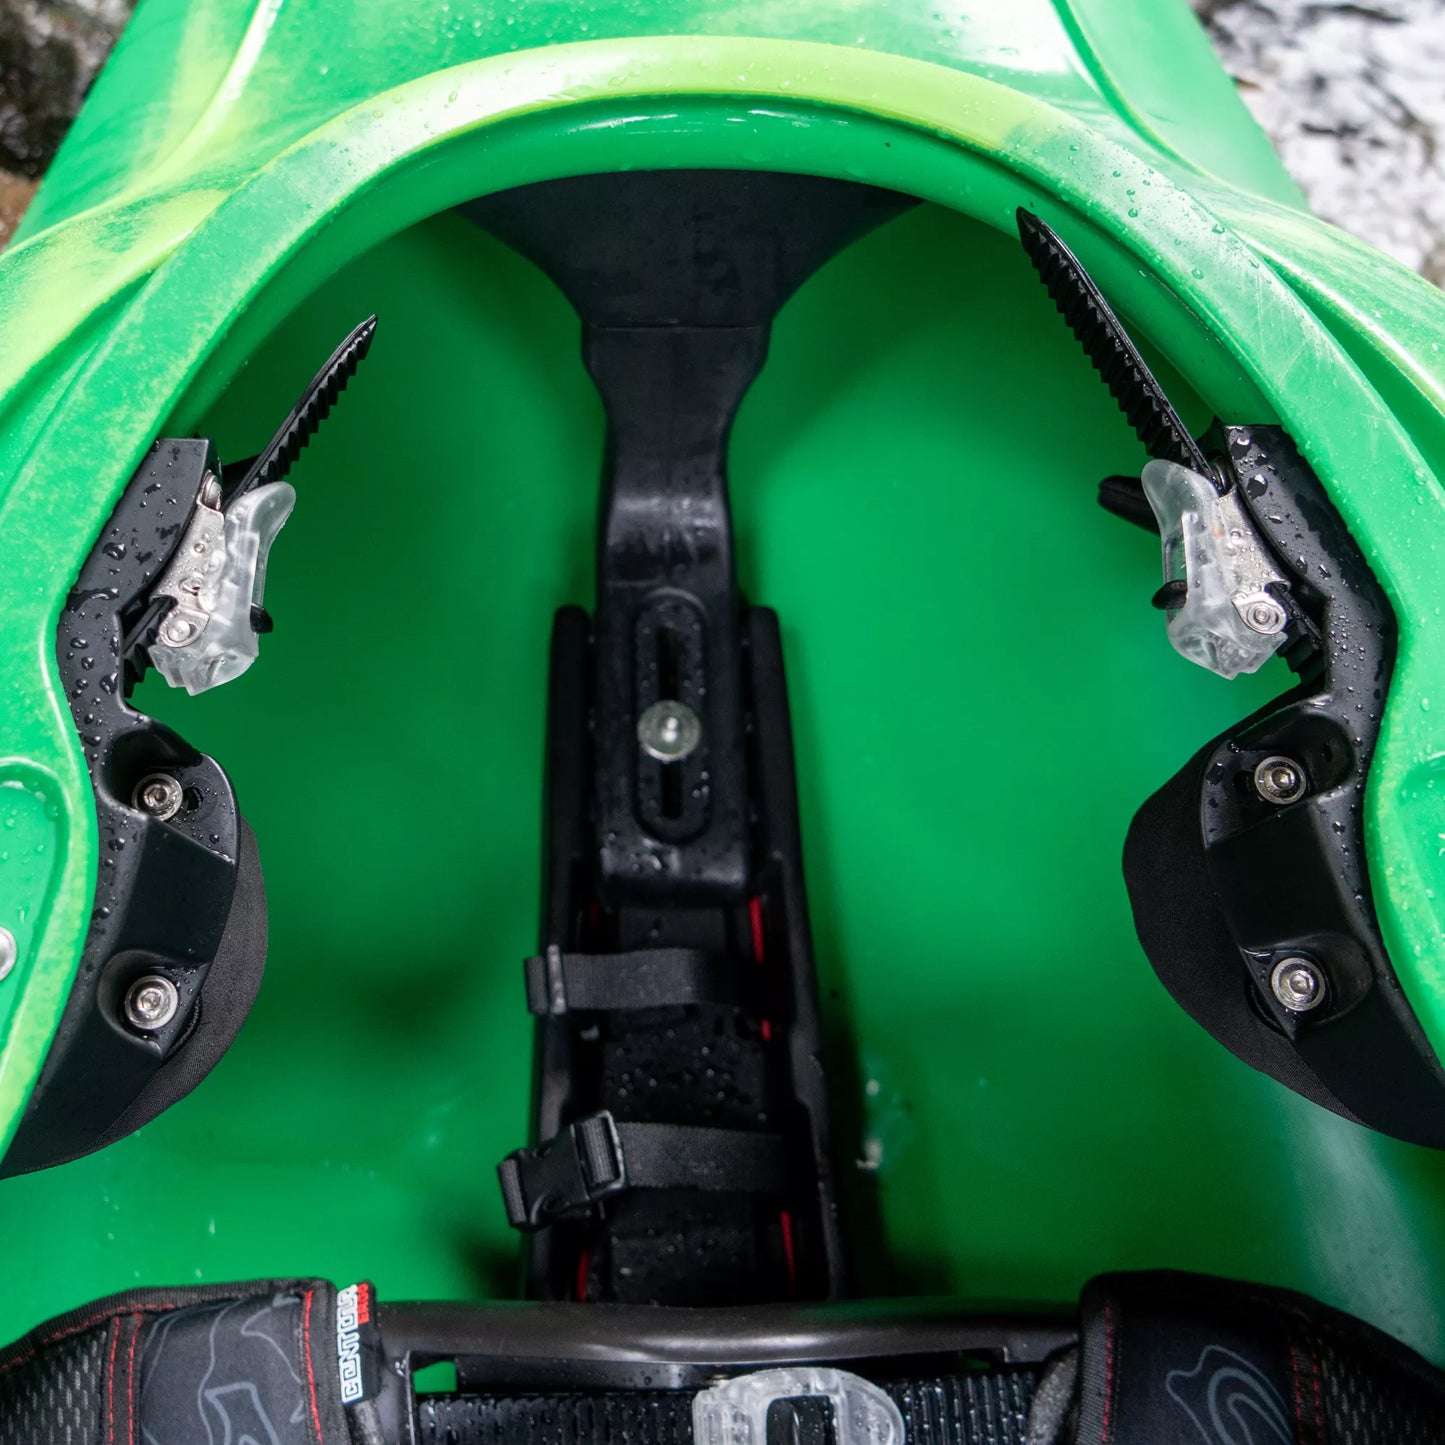 Close-up view of the footrest and seating area of a green Dagger Katana whitewater kayak.